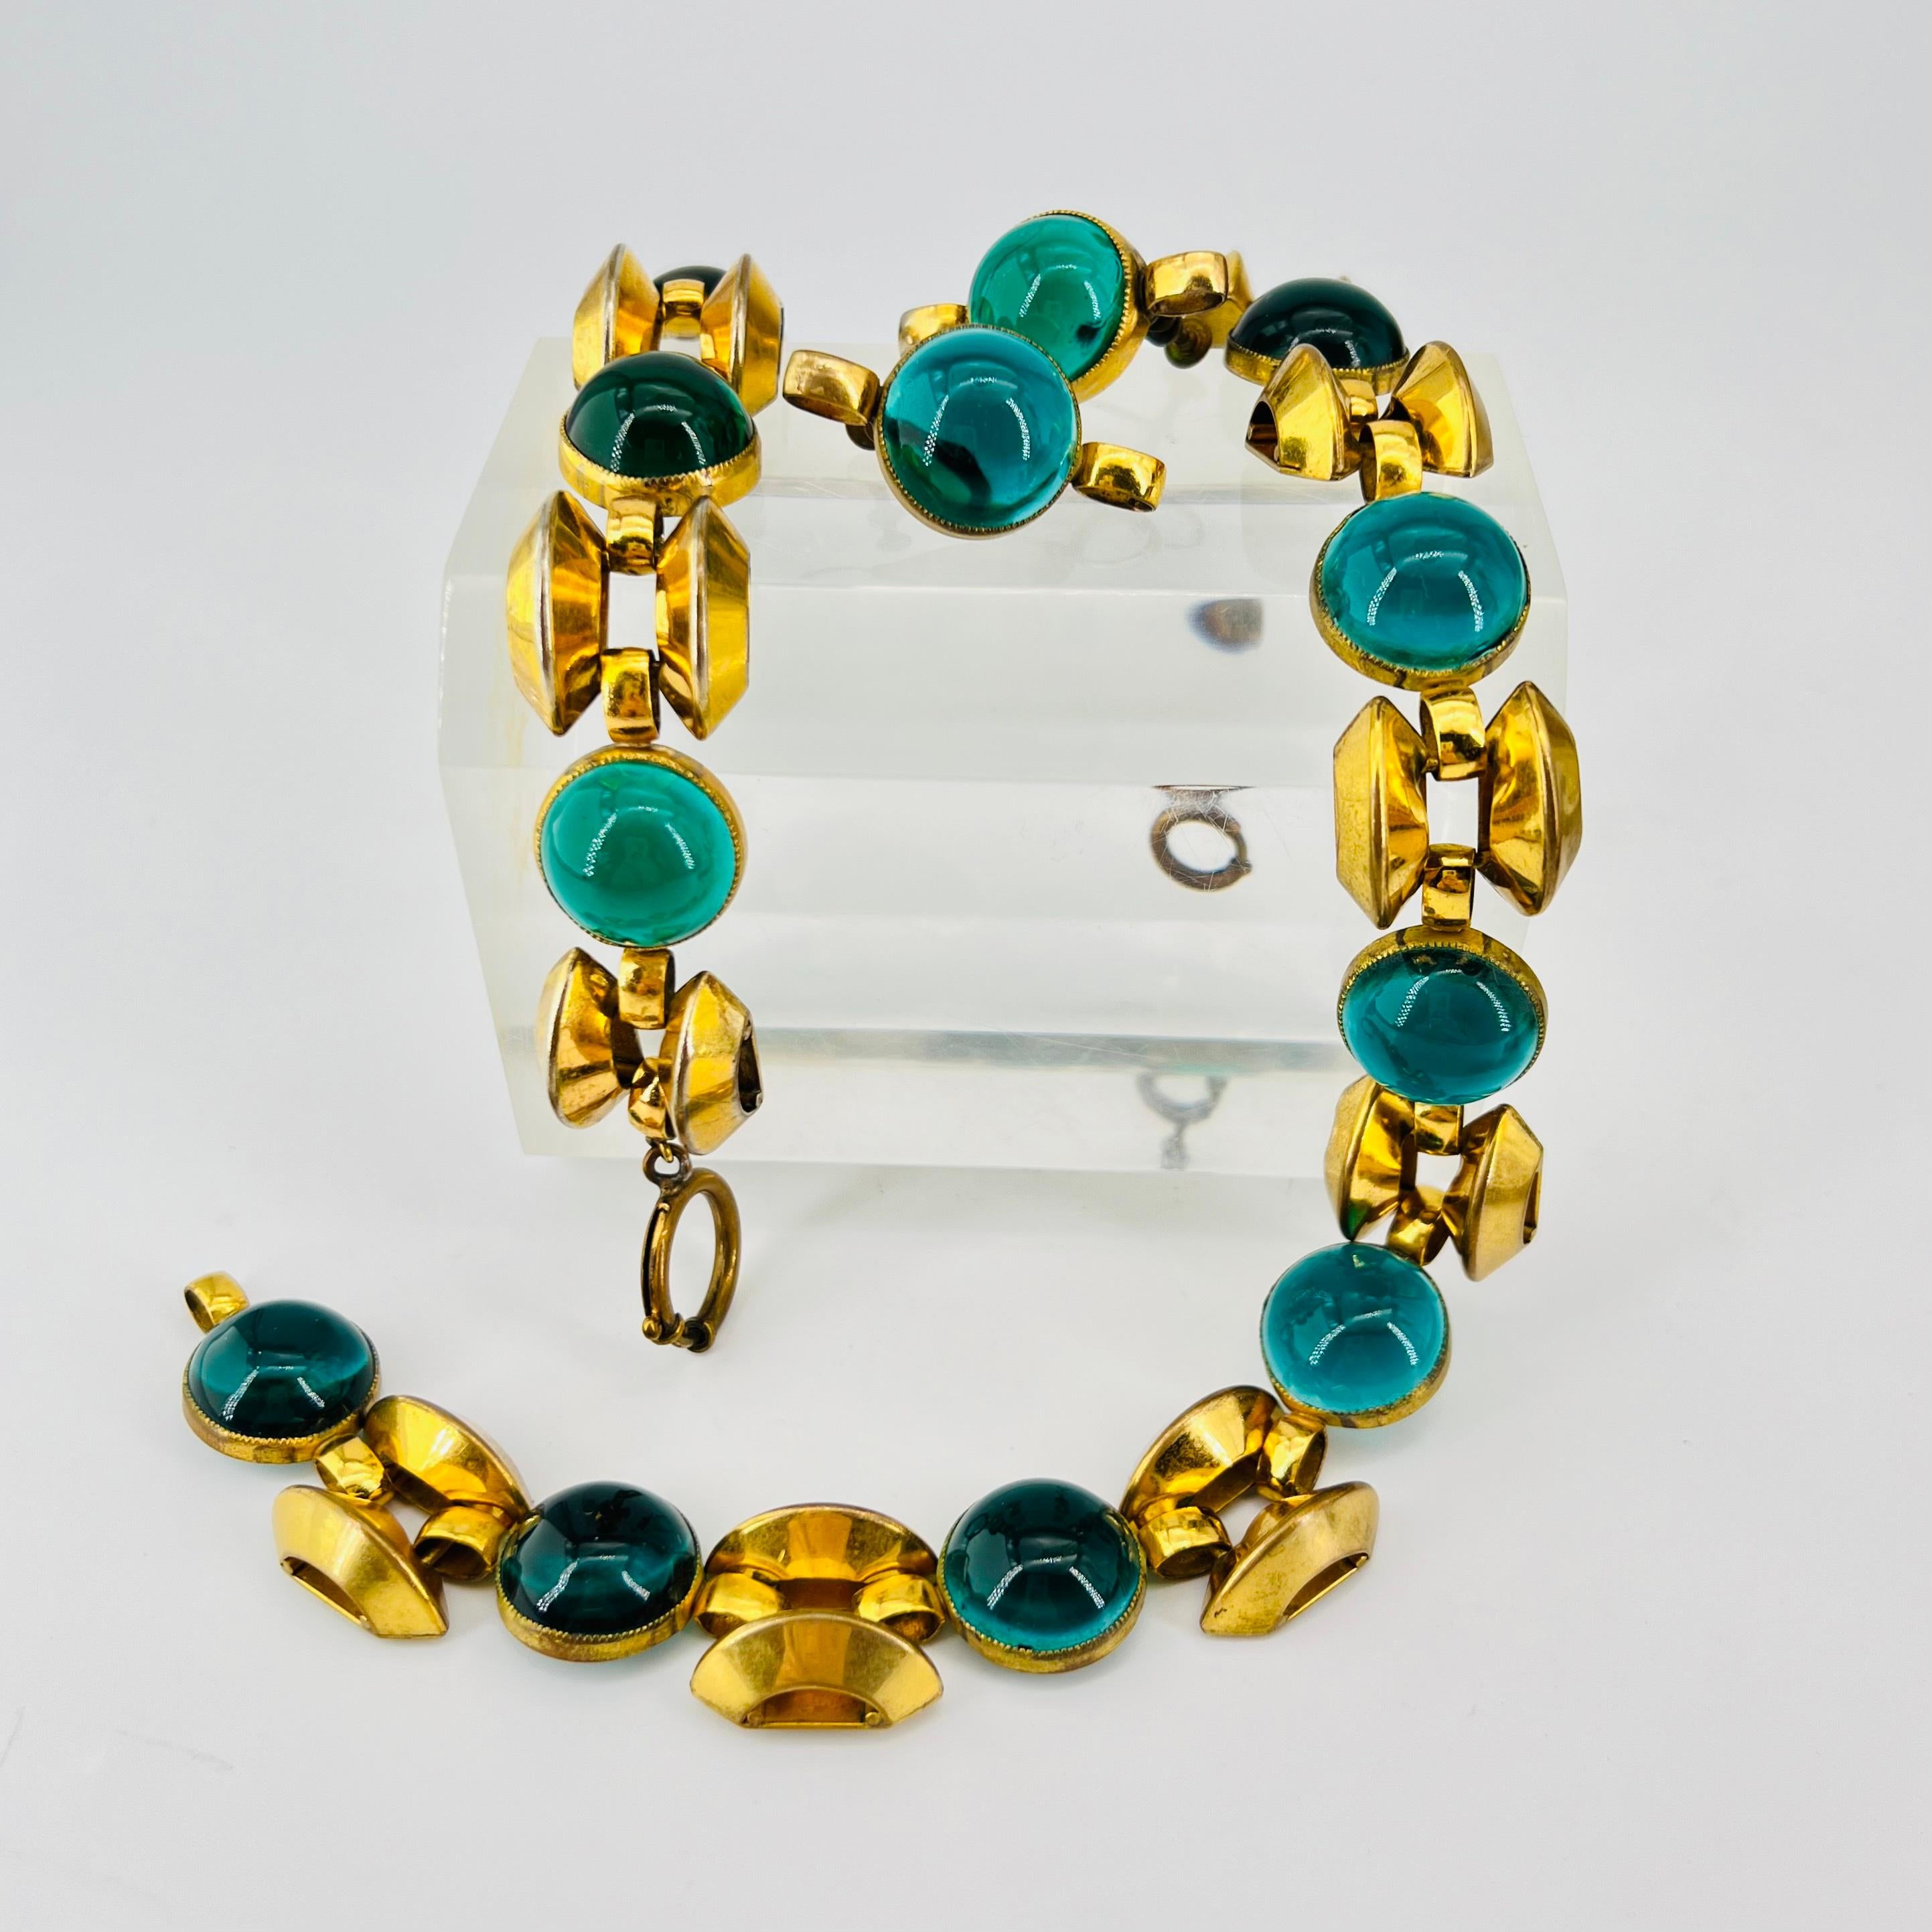 The Decadence of Early Haute Couture released by the hands of Elsa Schiaparelli.  Early 1930’s -1940’s House of Schiaparelli Studio in France. A Parure Set with Matching Necklace, Bracelet, and Screw on Earrings. Golden Art Deco Motifs & Green Glass